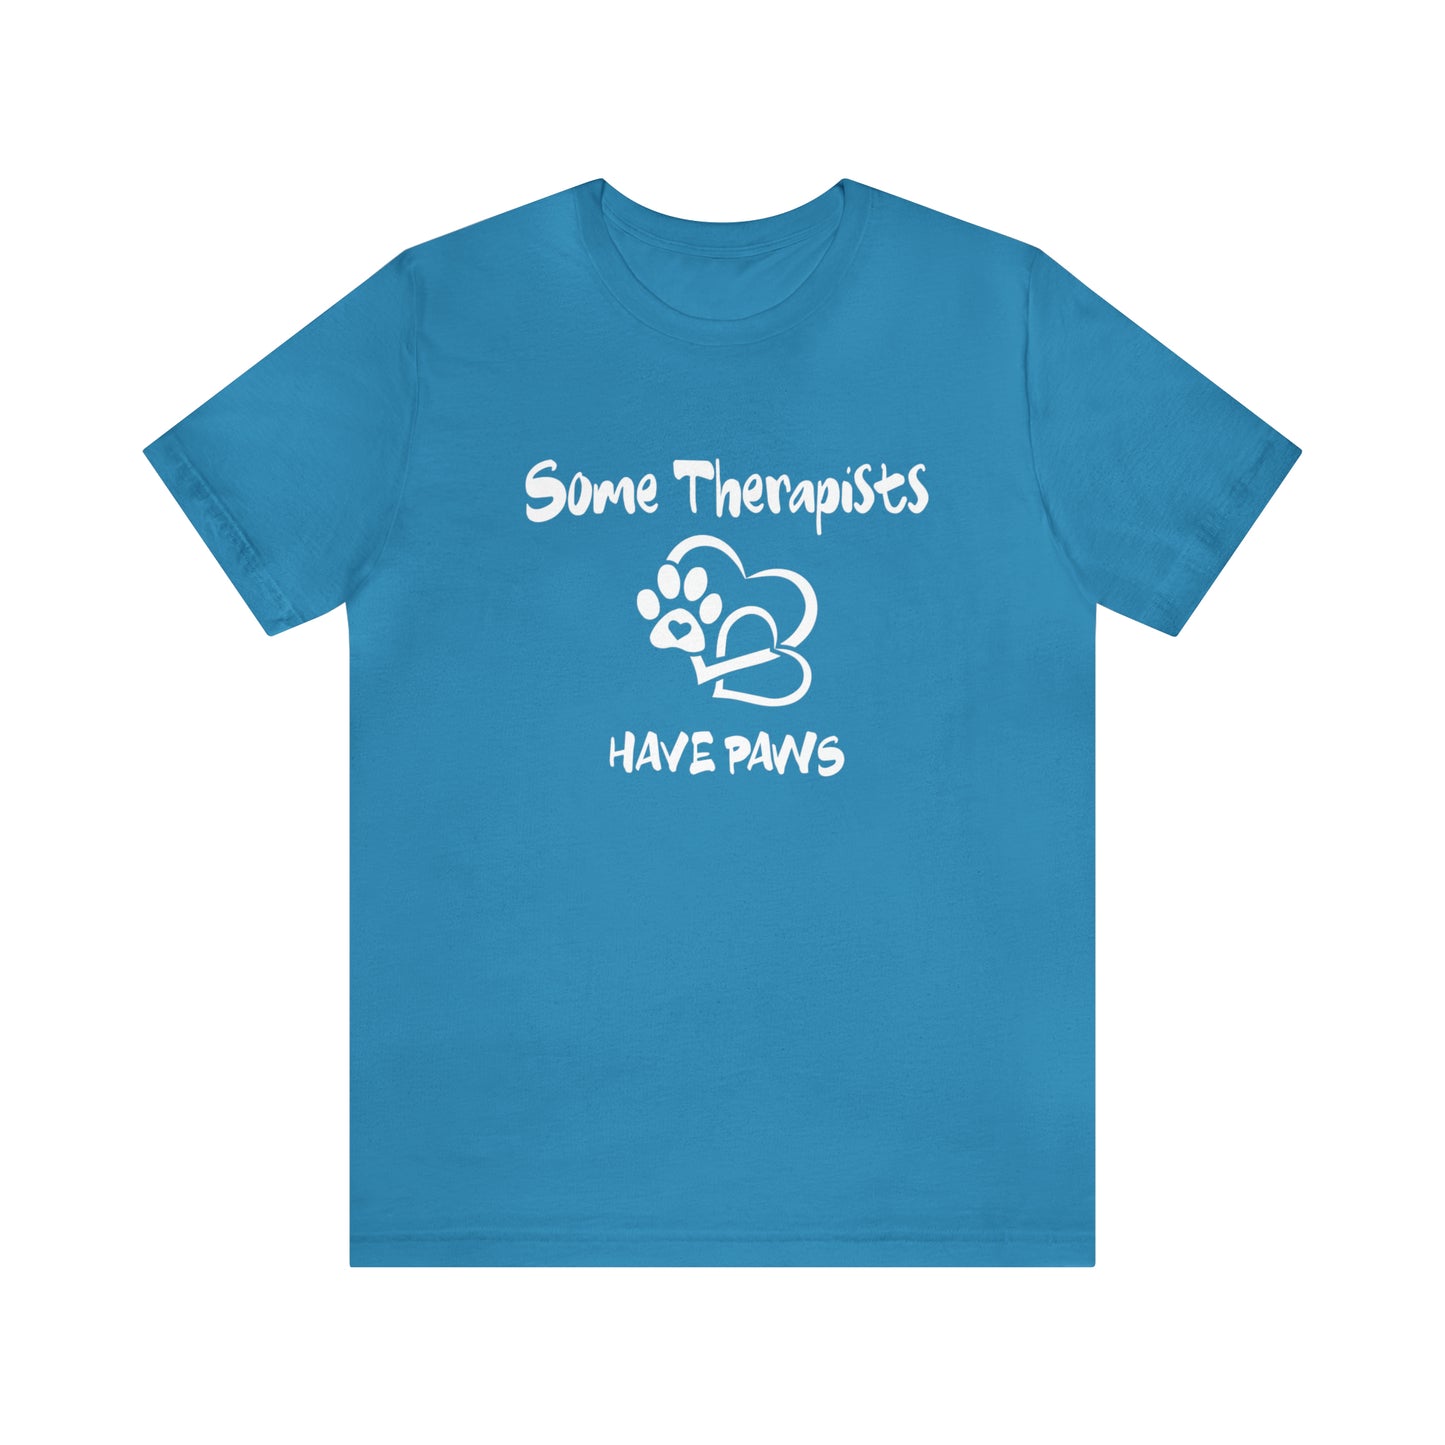 SOME THERAPISTS HAVE PAWS   -  Unisex Short Sleeve Tee